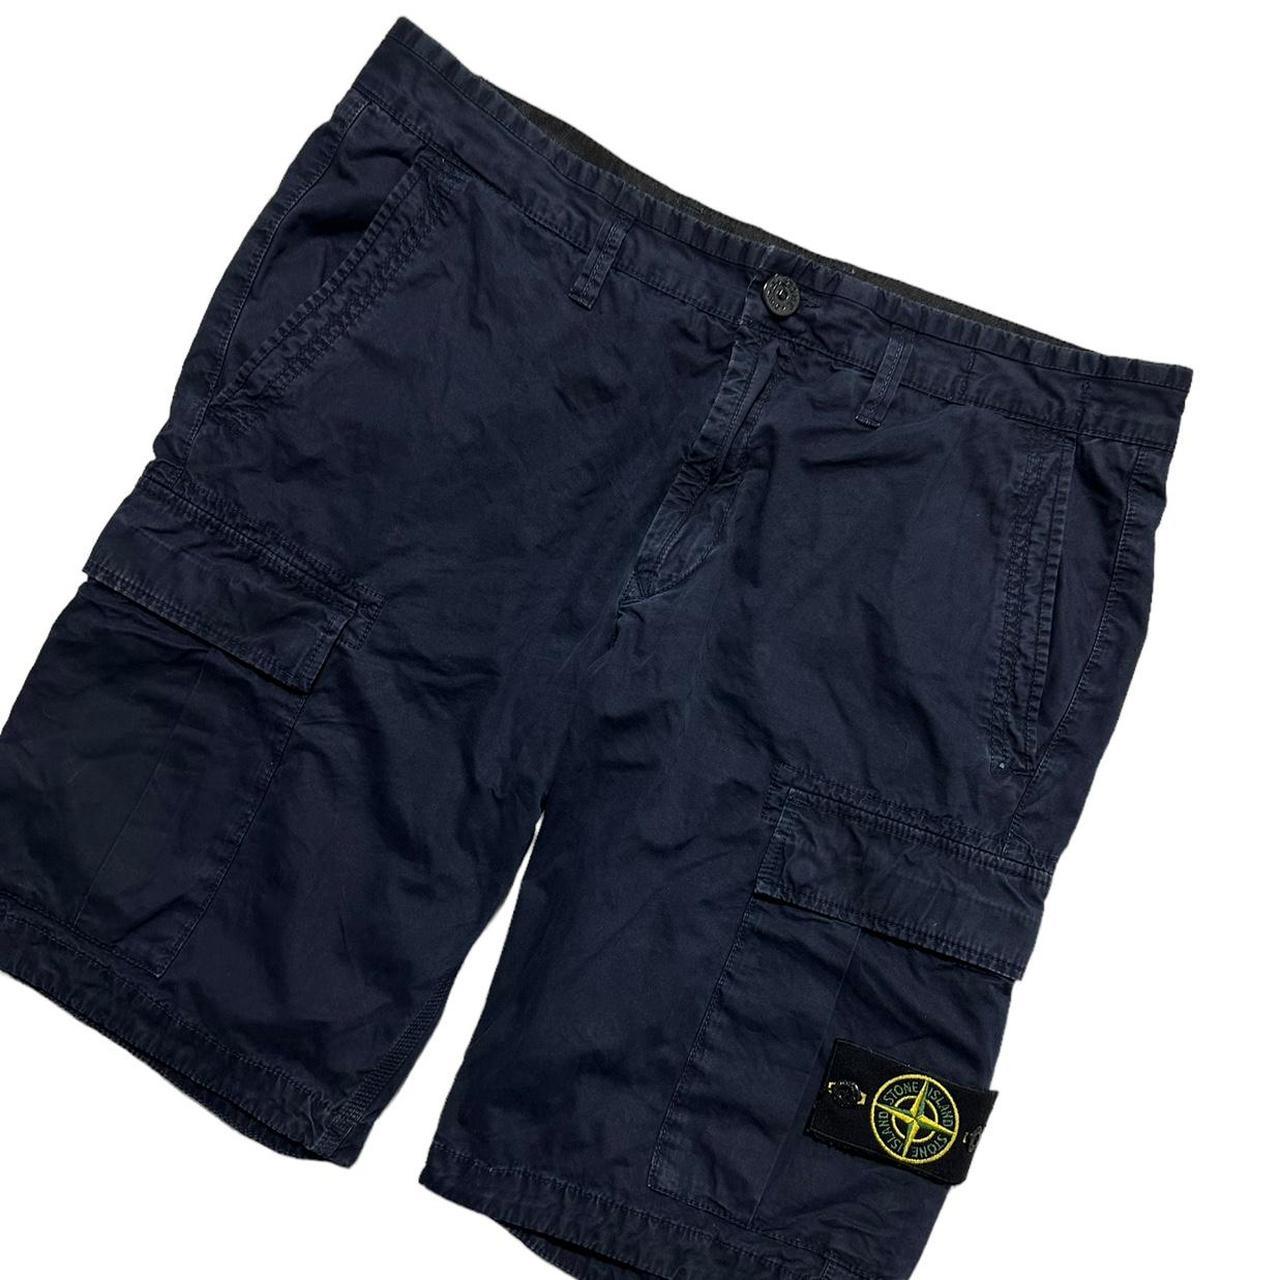 Stone Island Canvas Cargo Shorts - Known Source